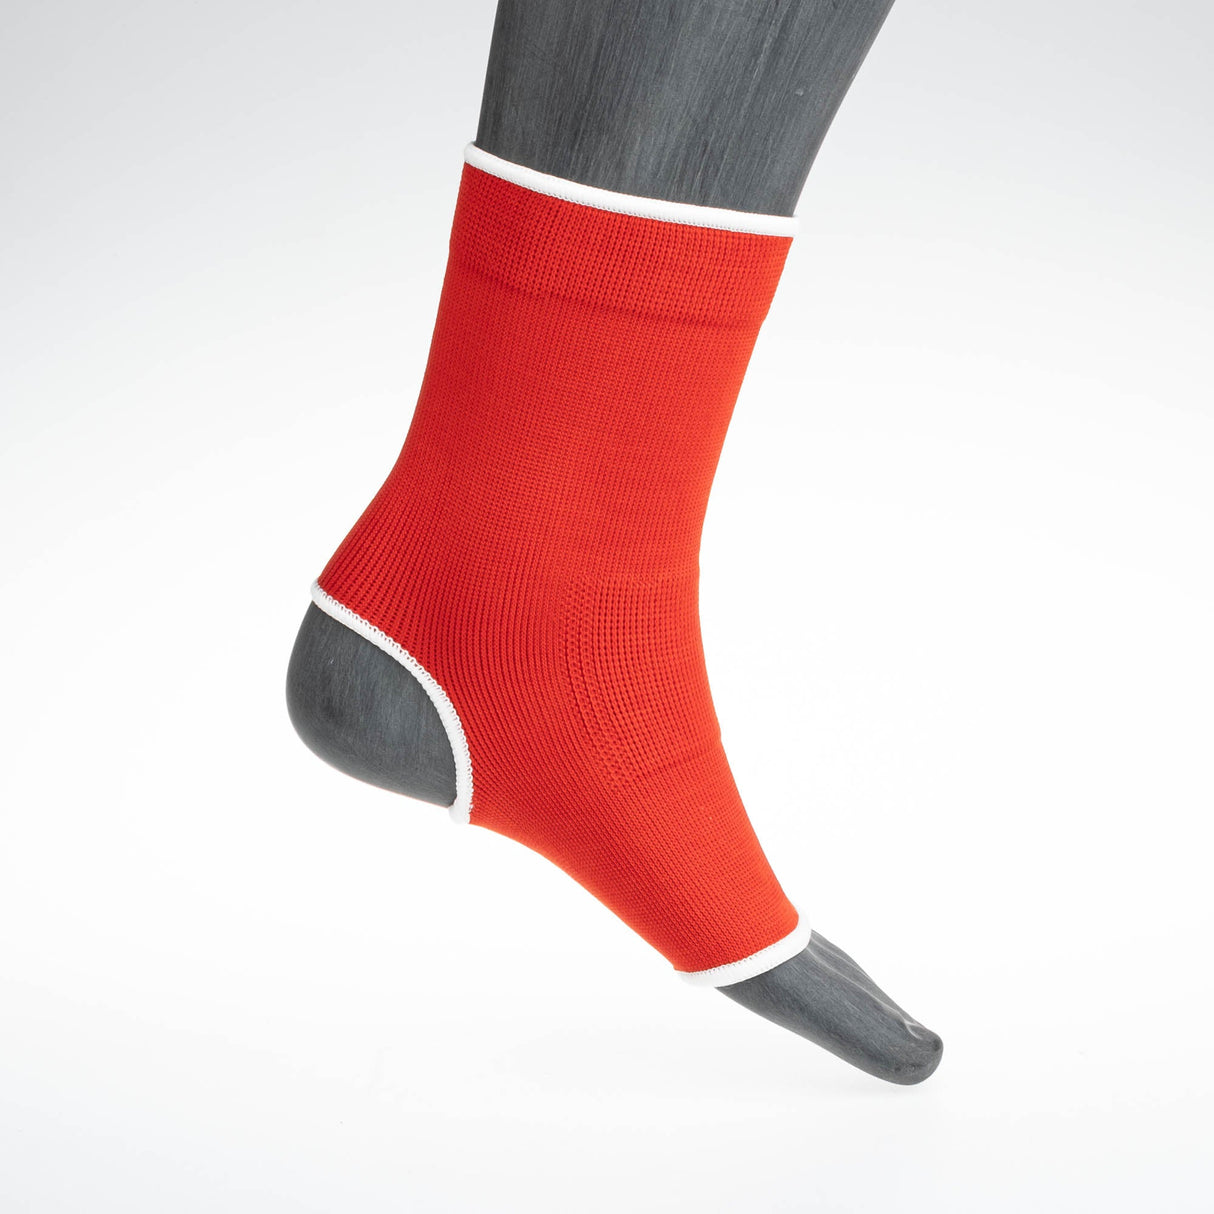 Fighter Ankle Support - red/white, JE-1508R